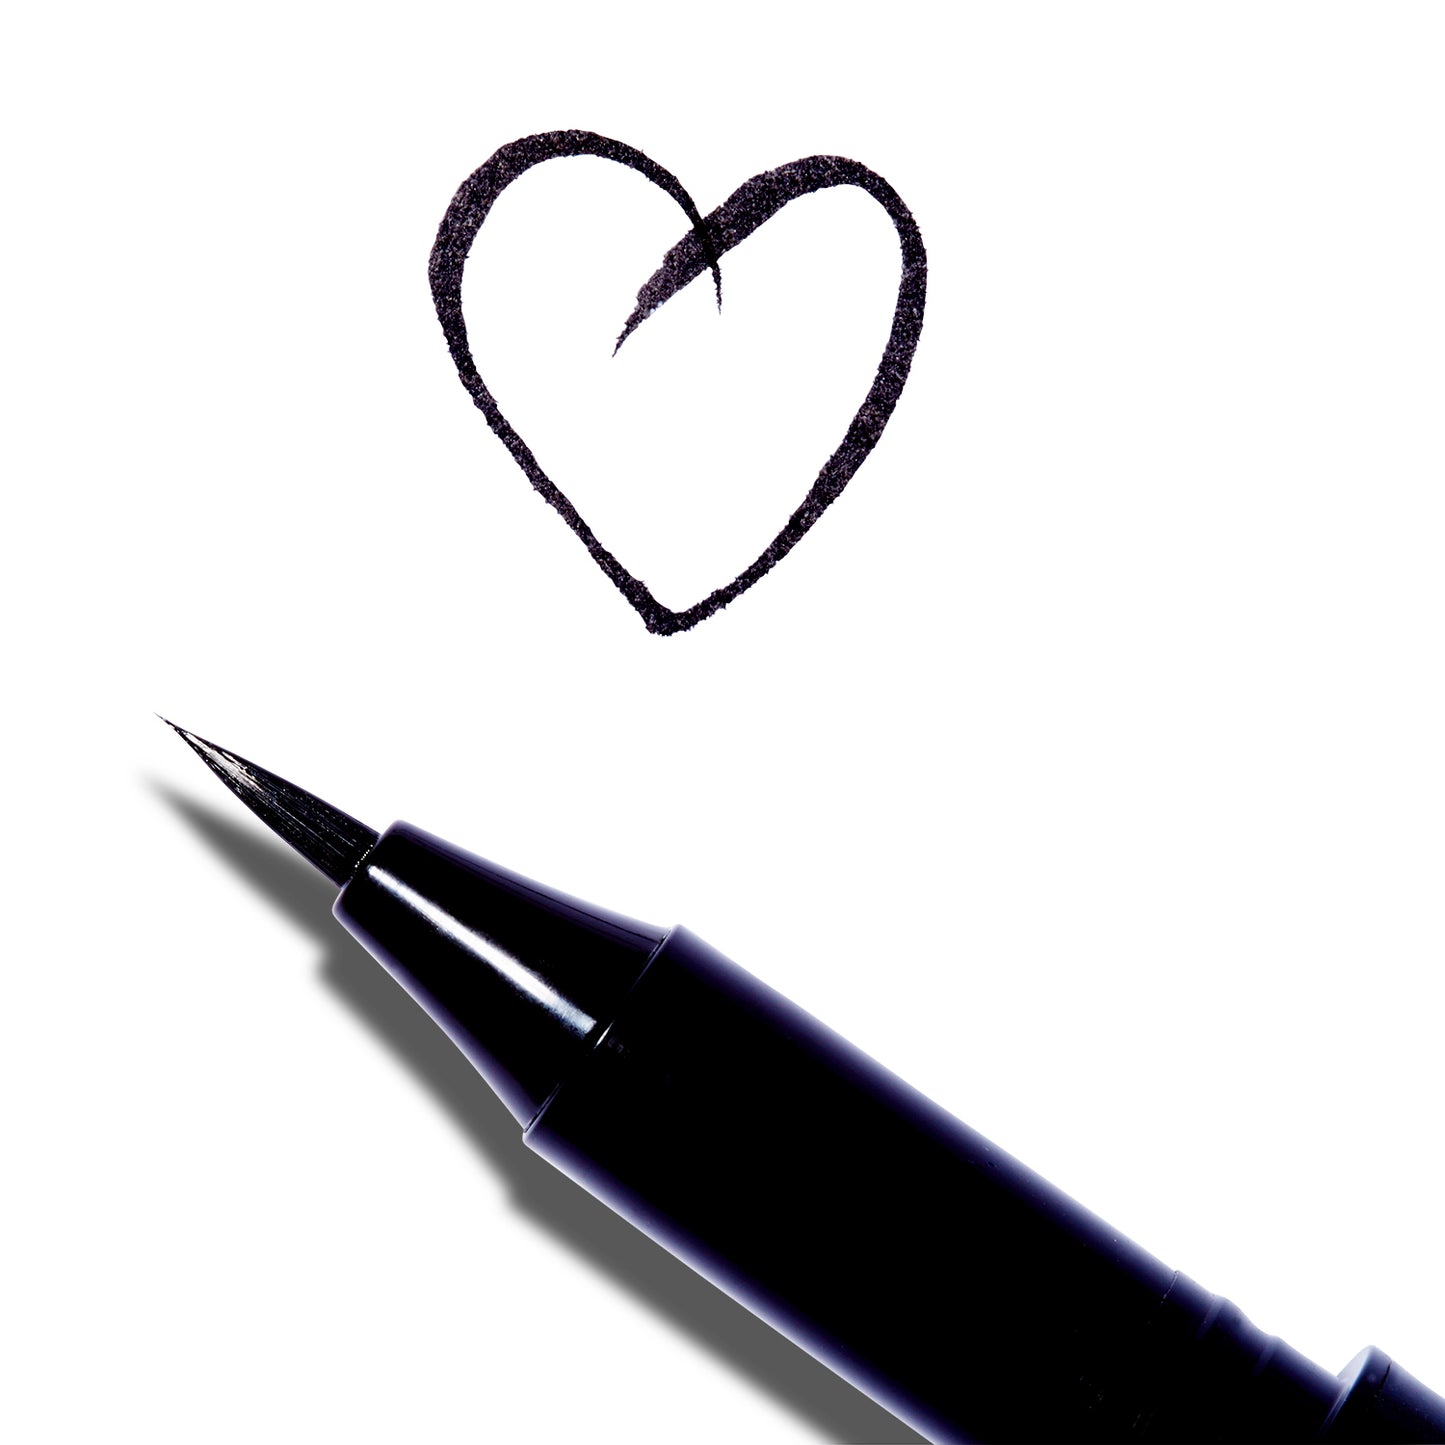  A close up of the Surratt Autographique Liquid Eyeliner in Chat Noir, a deep black. The pen is made of individual hairs and goes to a sharp point. The pen is angled and there is a heart drawn above it in the ink from the eyeliner.